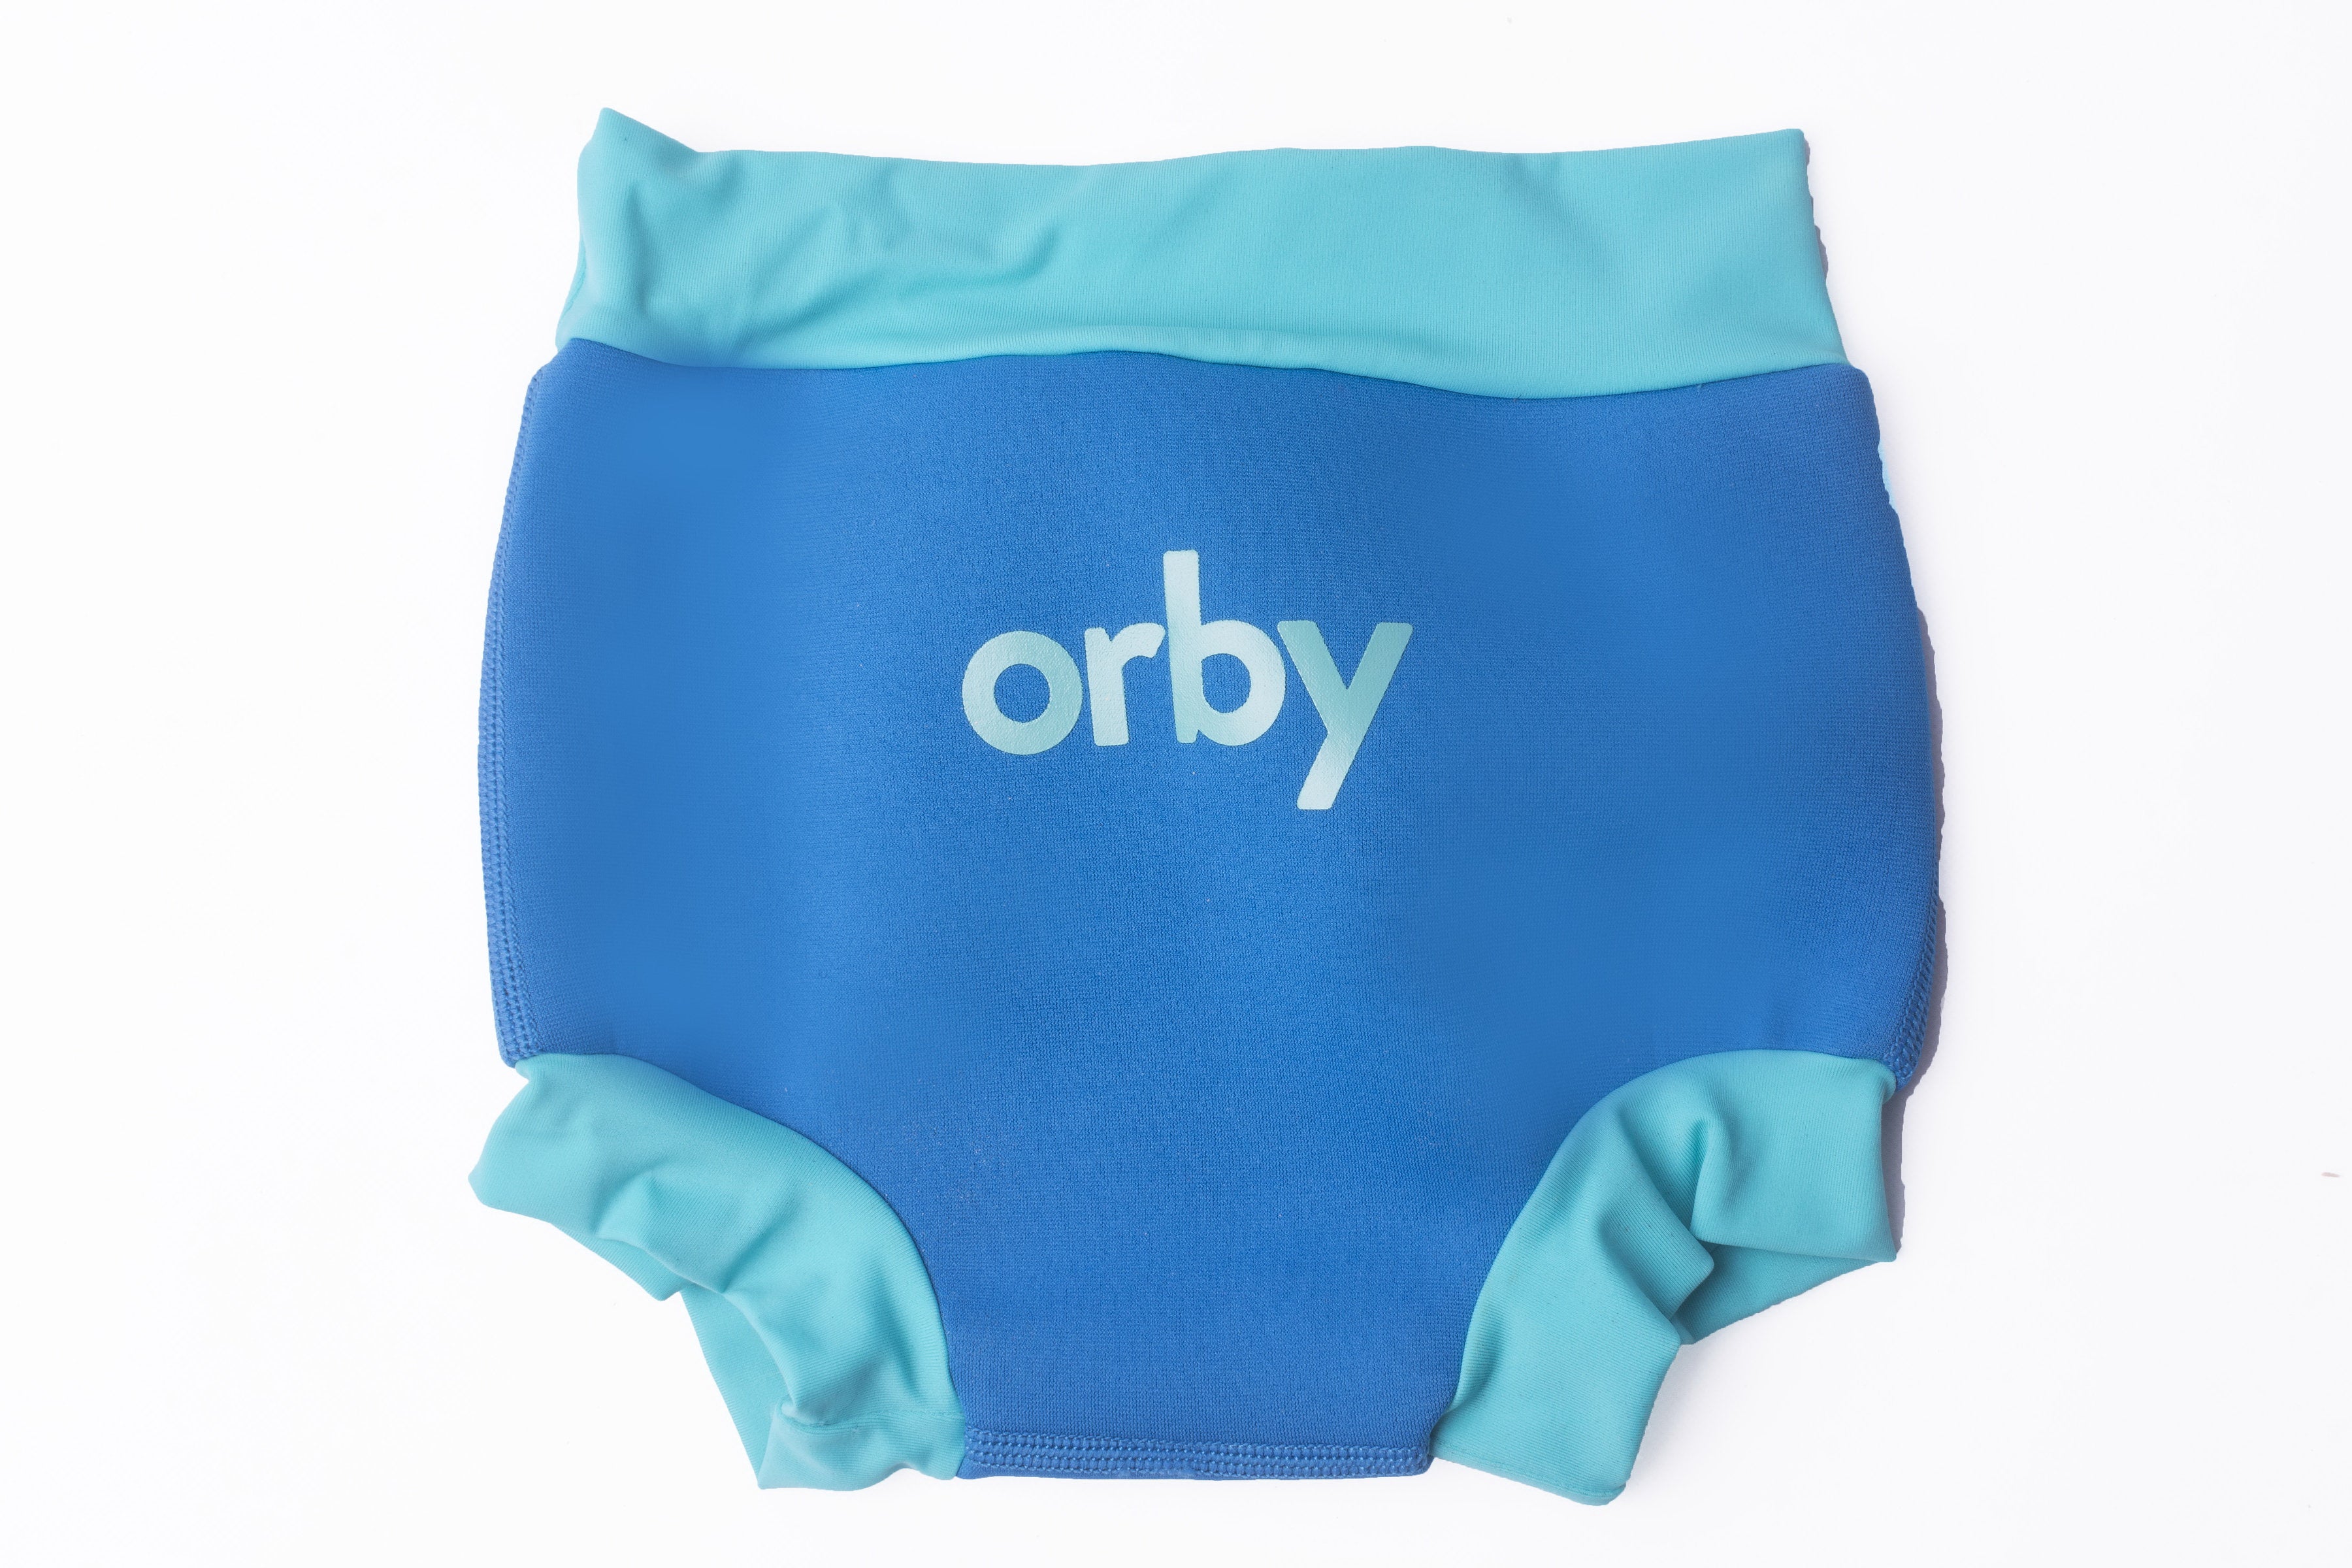 Orby Nappy - Blue